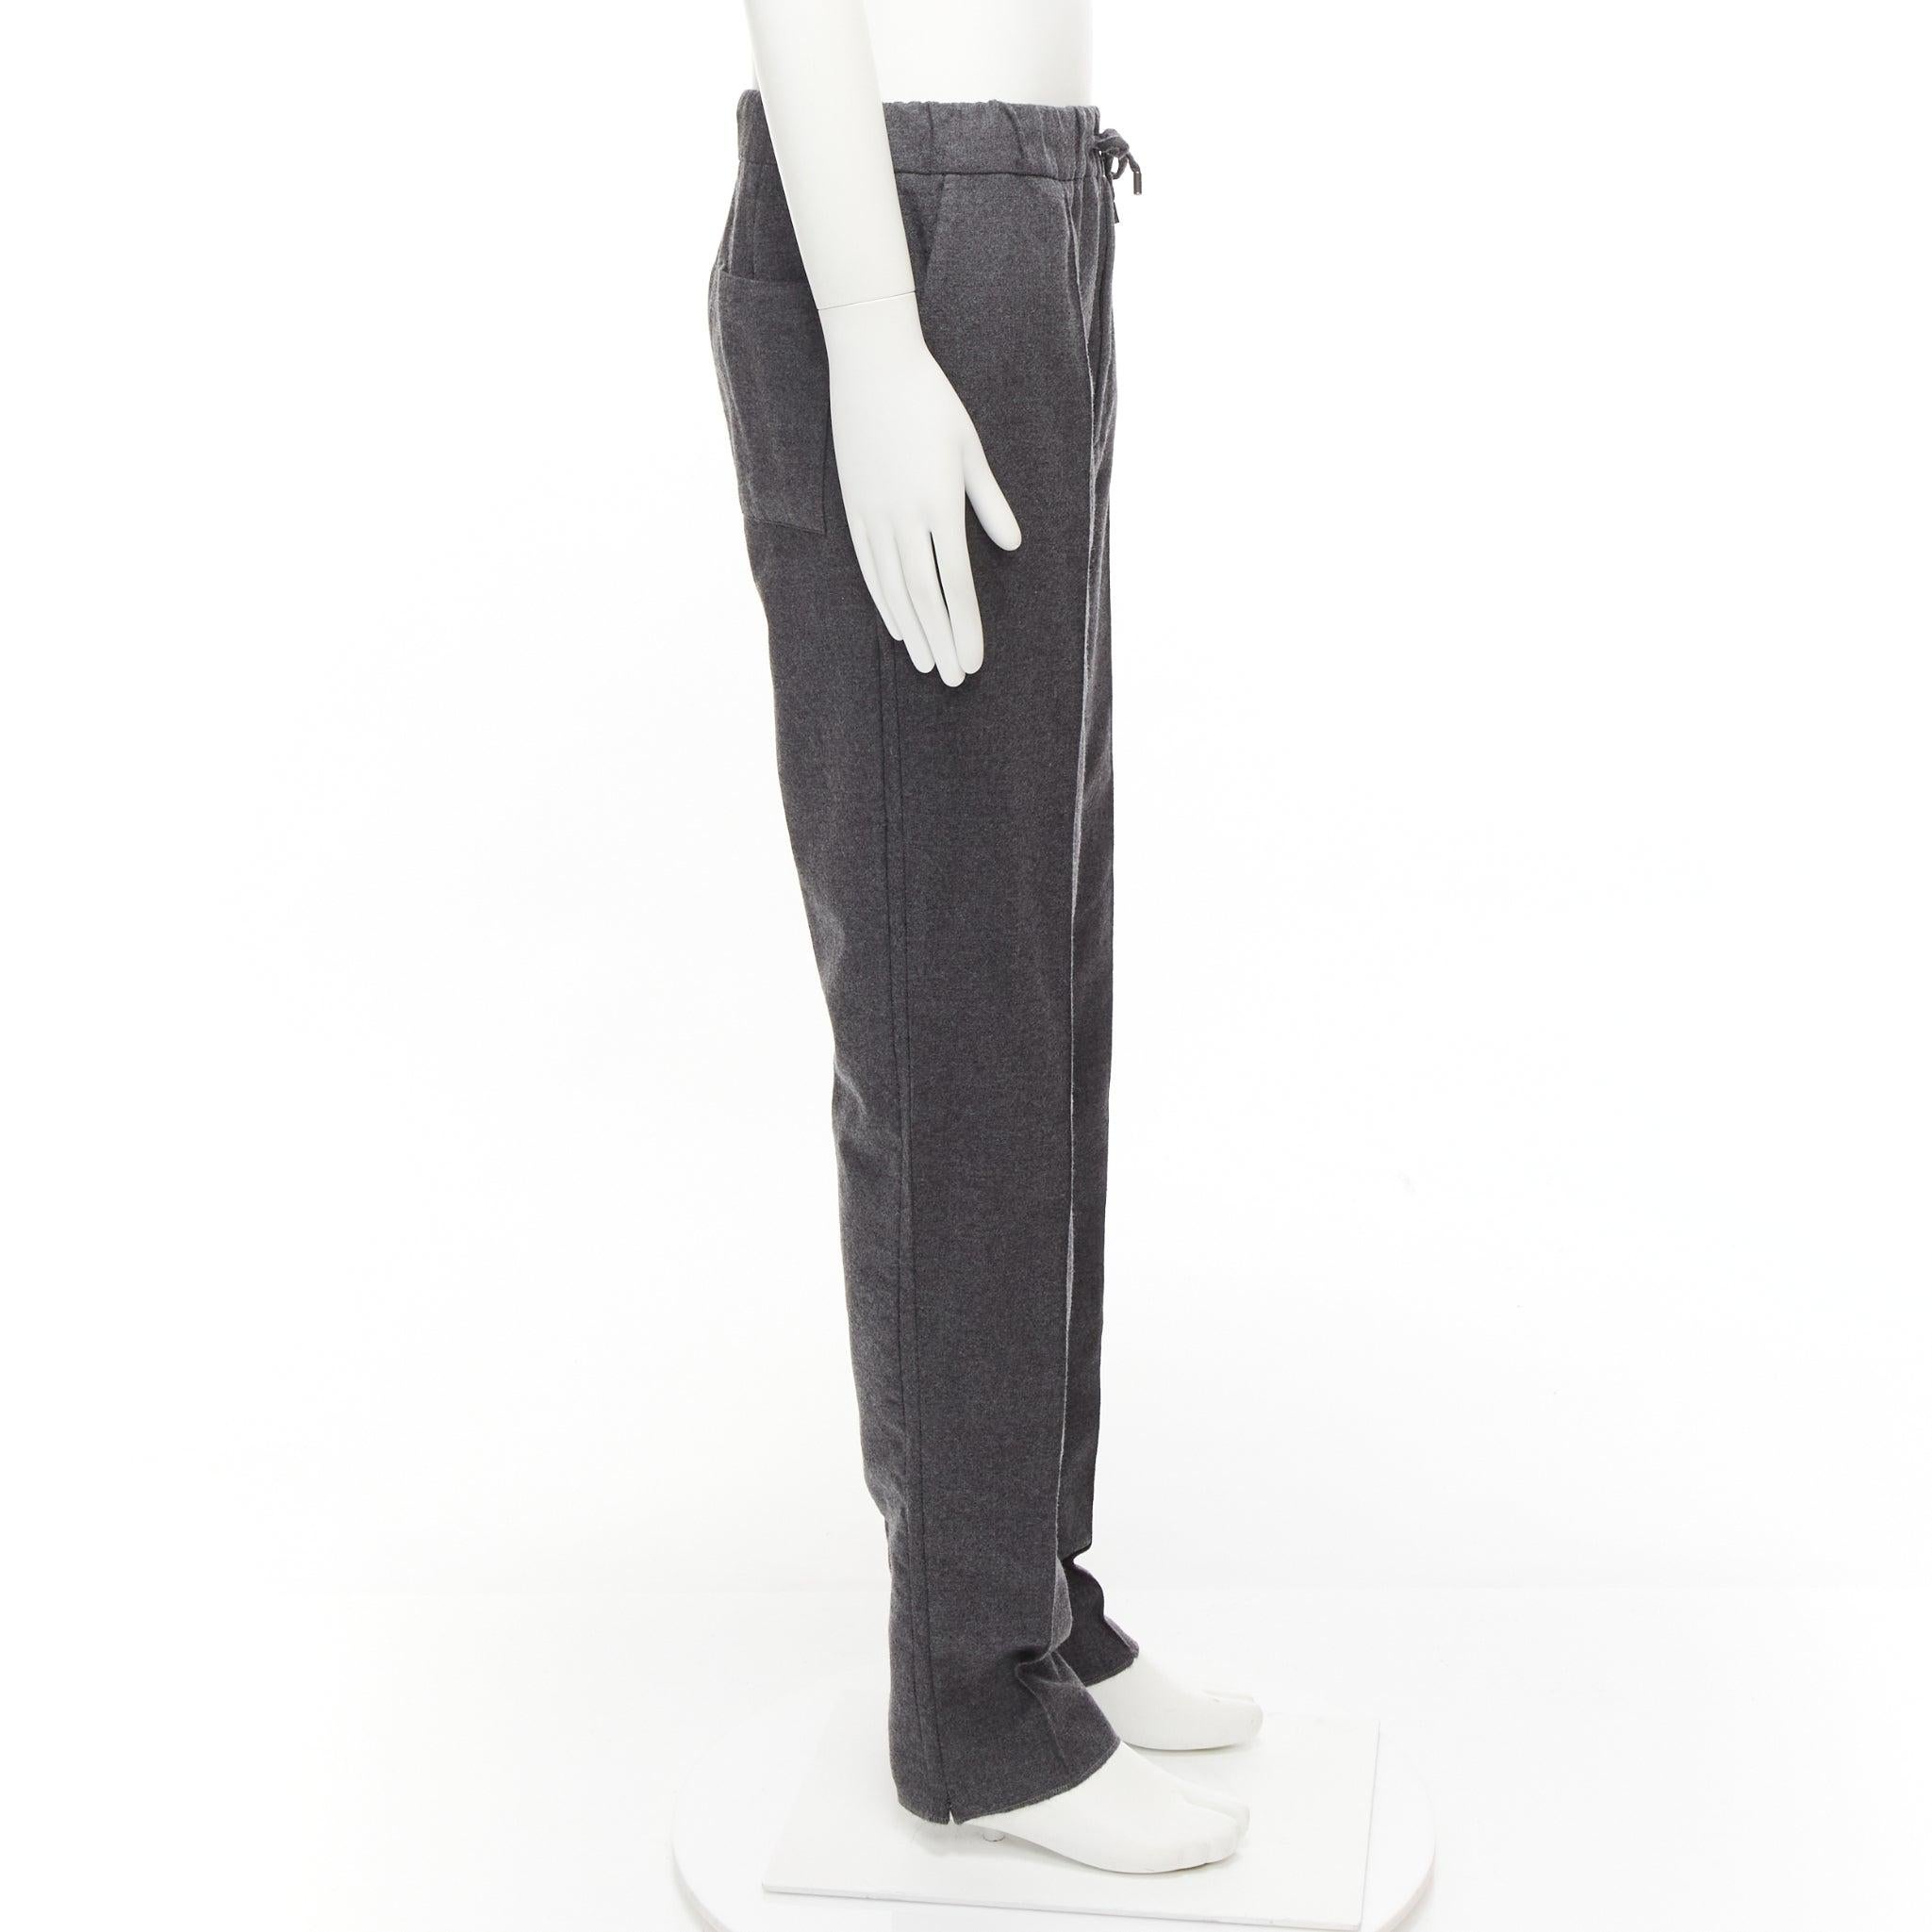 FENDI 100% virgin wool grey drawstring waistband casual dress trousers IT46 S
Reference: CNLE/A00274
Brand: Fendi
Material: Virgin Wool
Color: Grey
Pattern: Solid
Closure: Drawstring
Extra Details: Discreet FENDI drawstring details. 1 pocket at